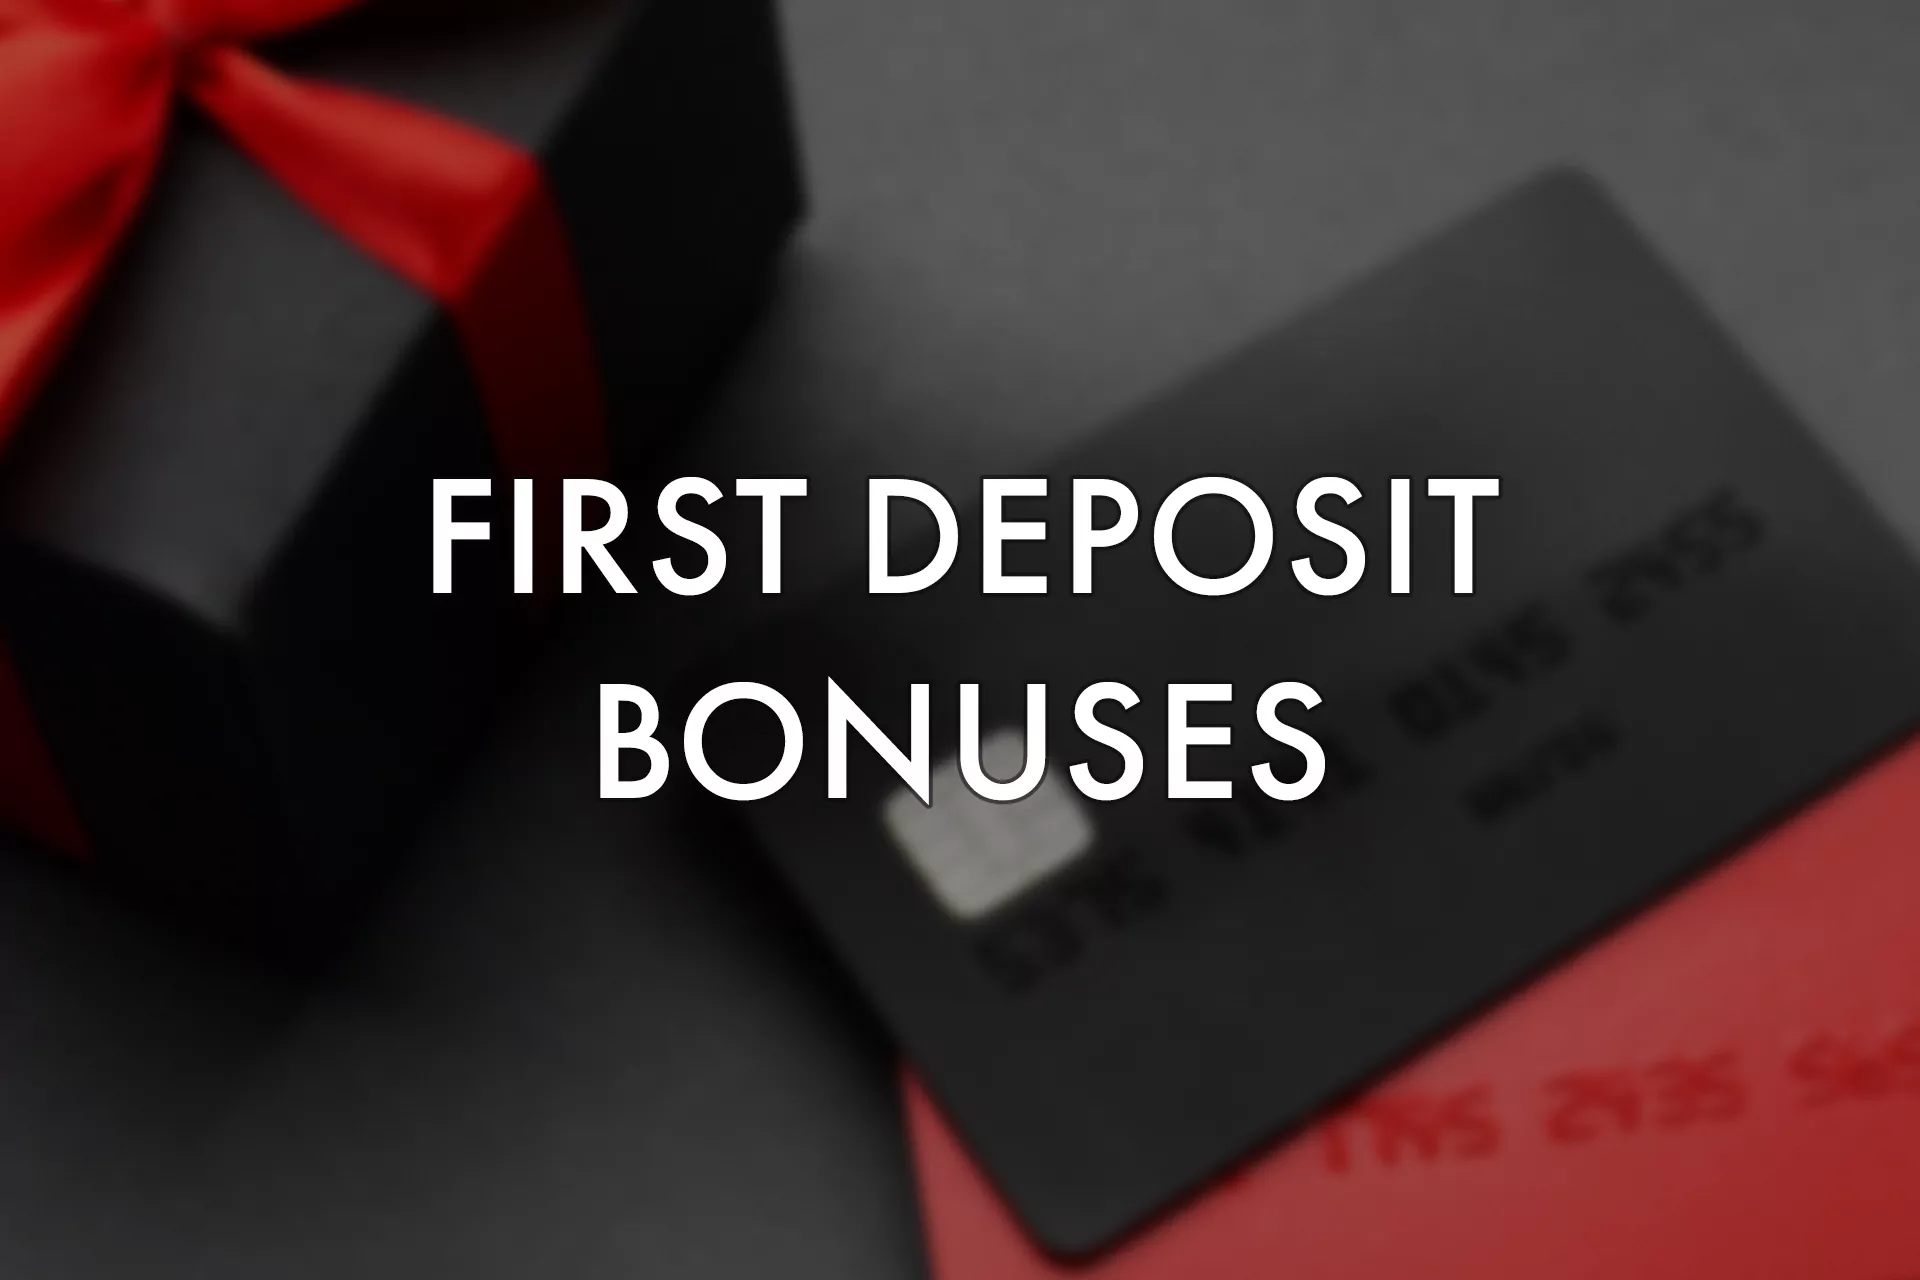 Some bookmakers change welcome offers with the first deposit bonuses.